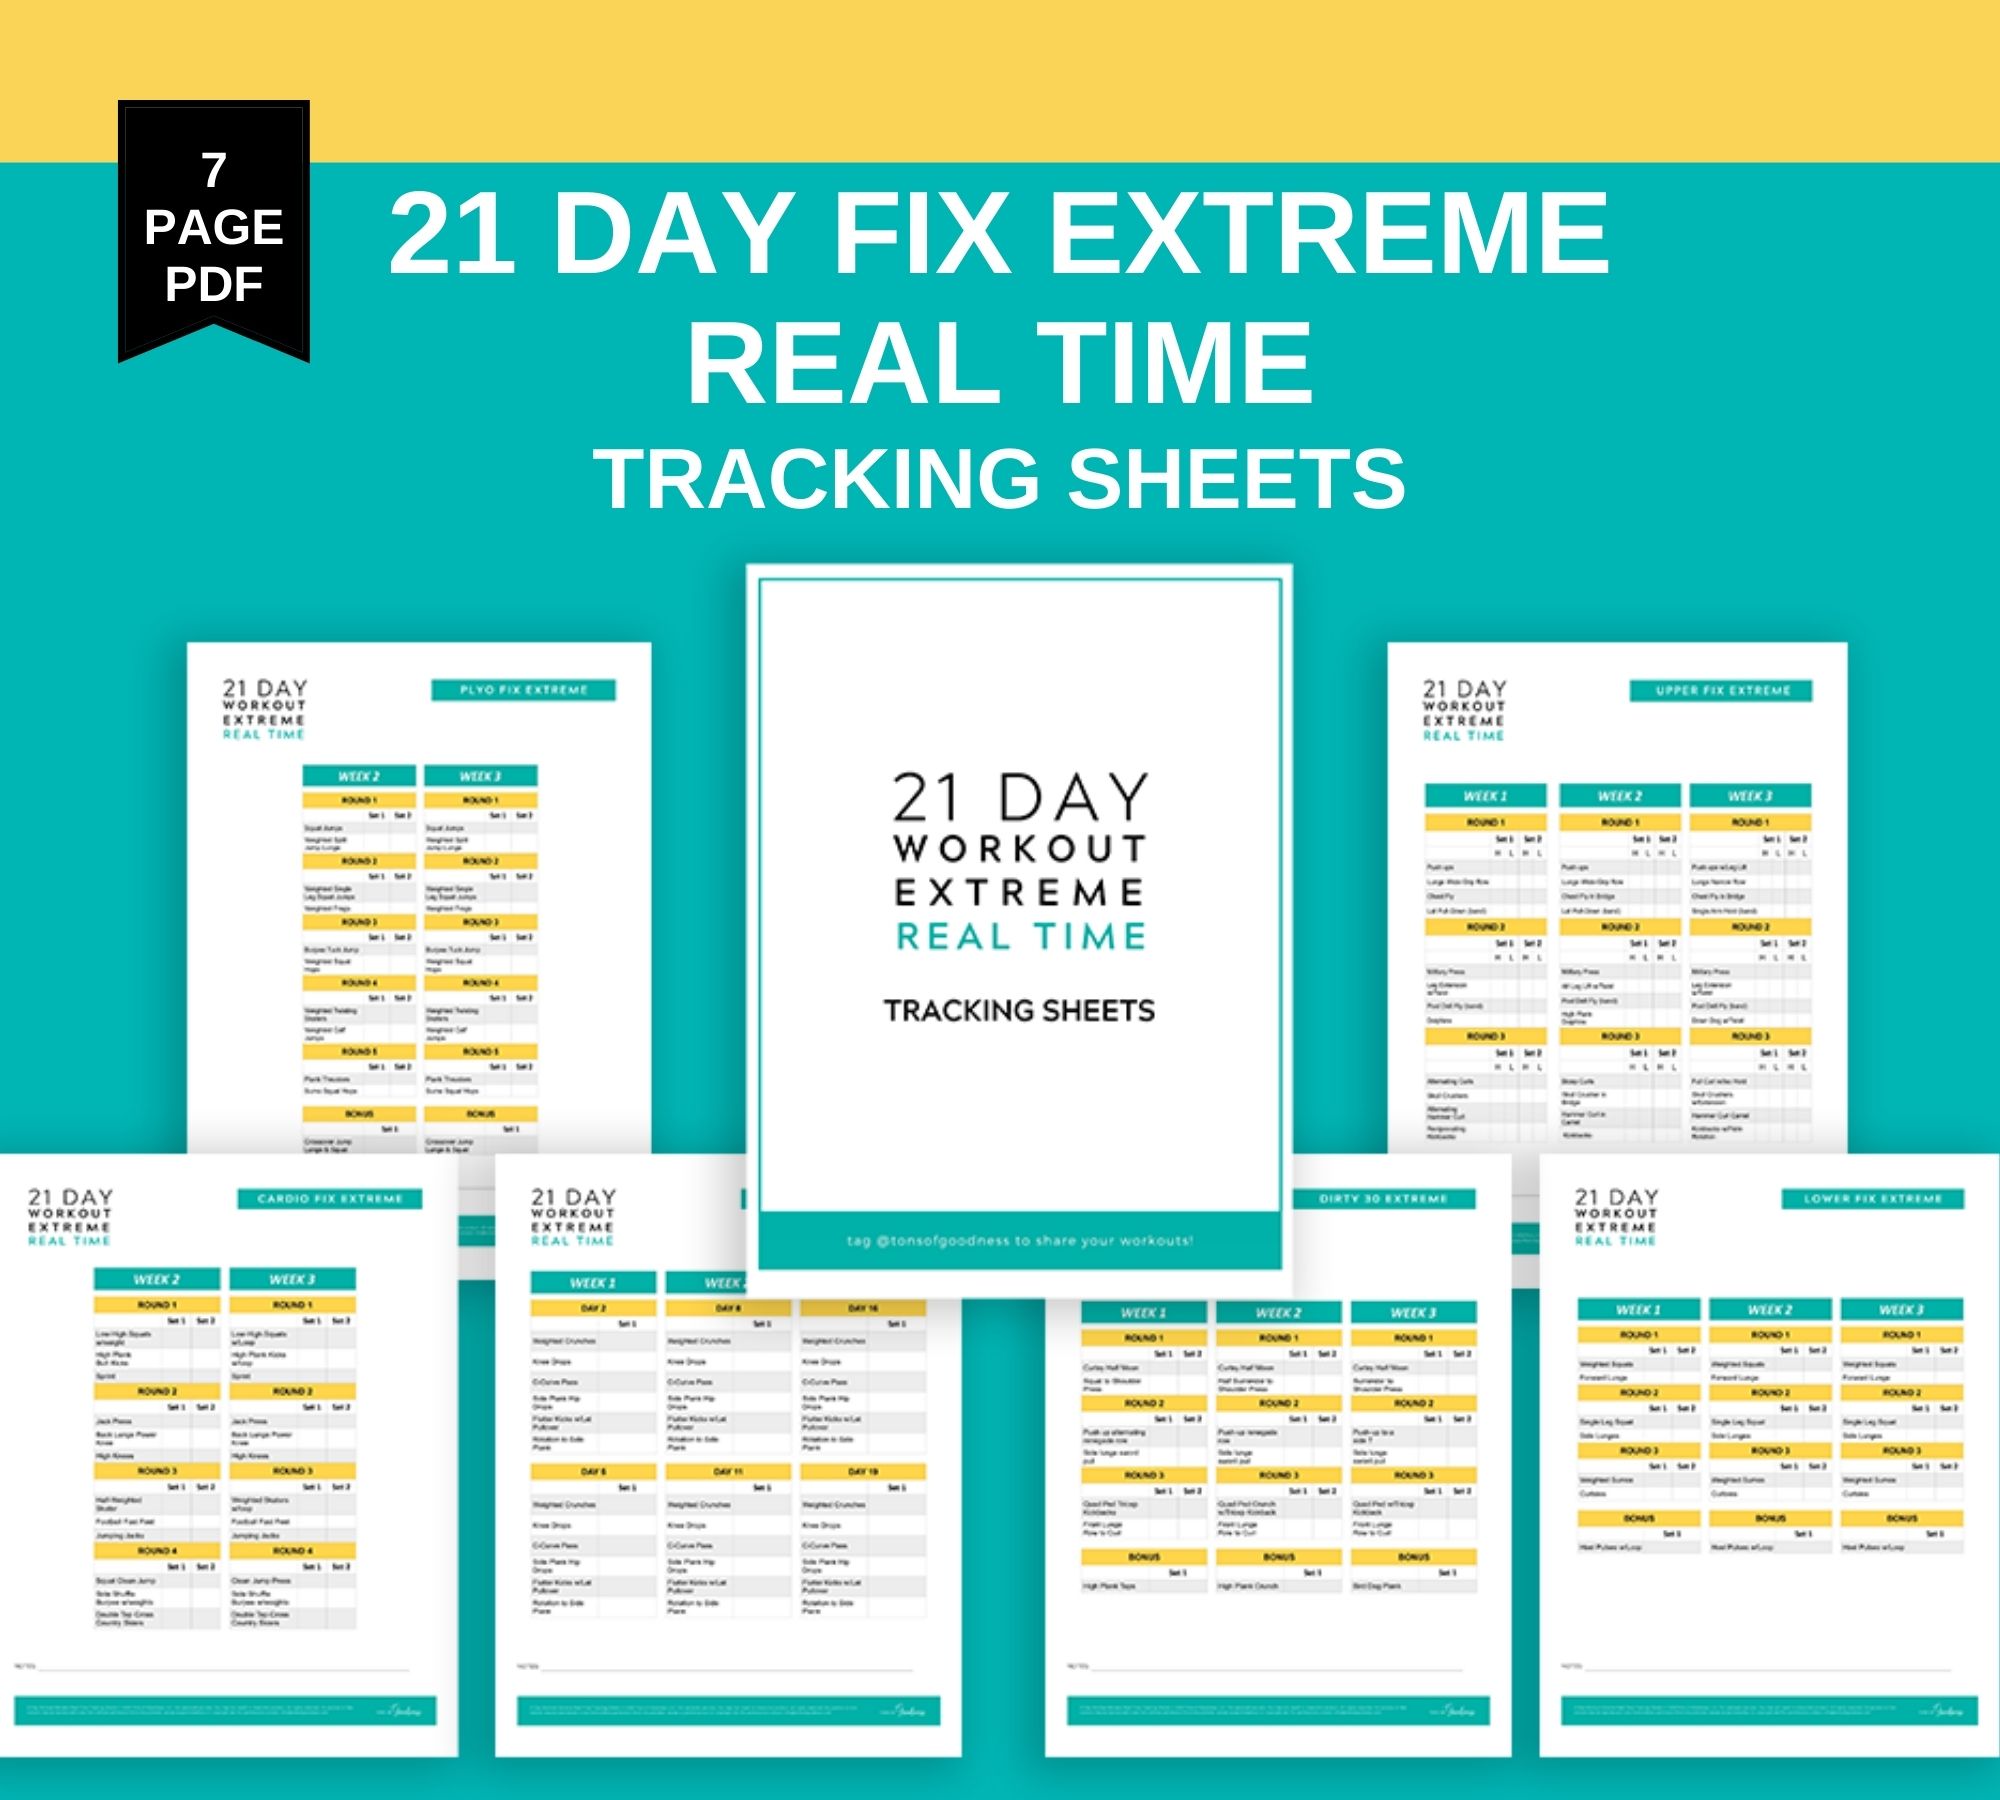 21 Day Fix EXTREME Real Time Printable Tracking Sheets